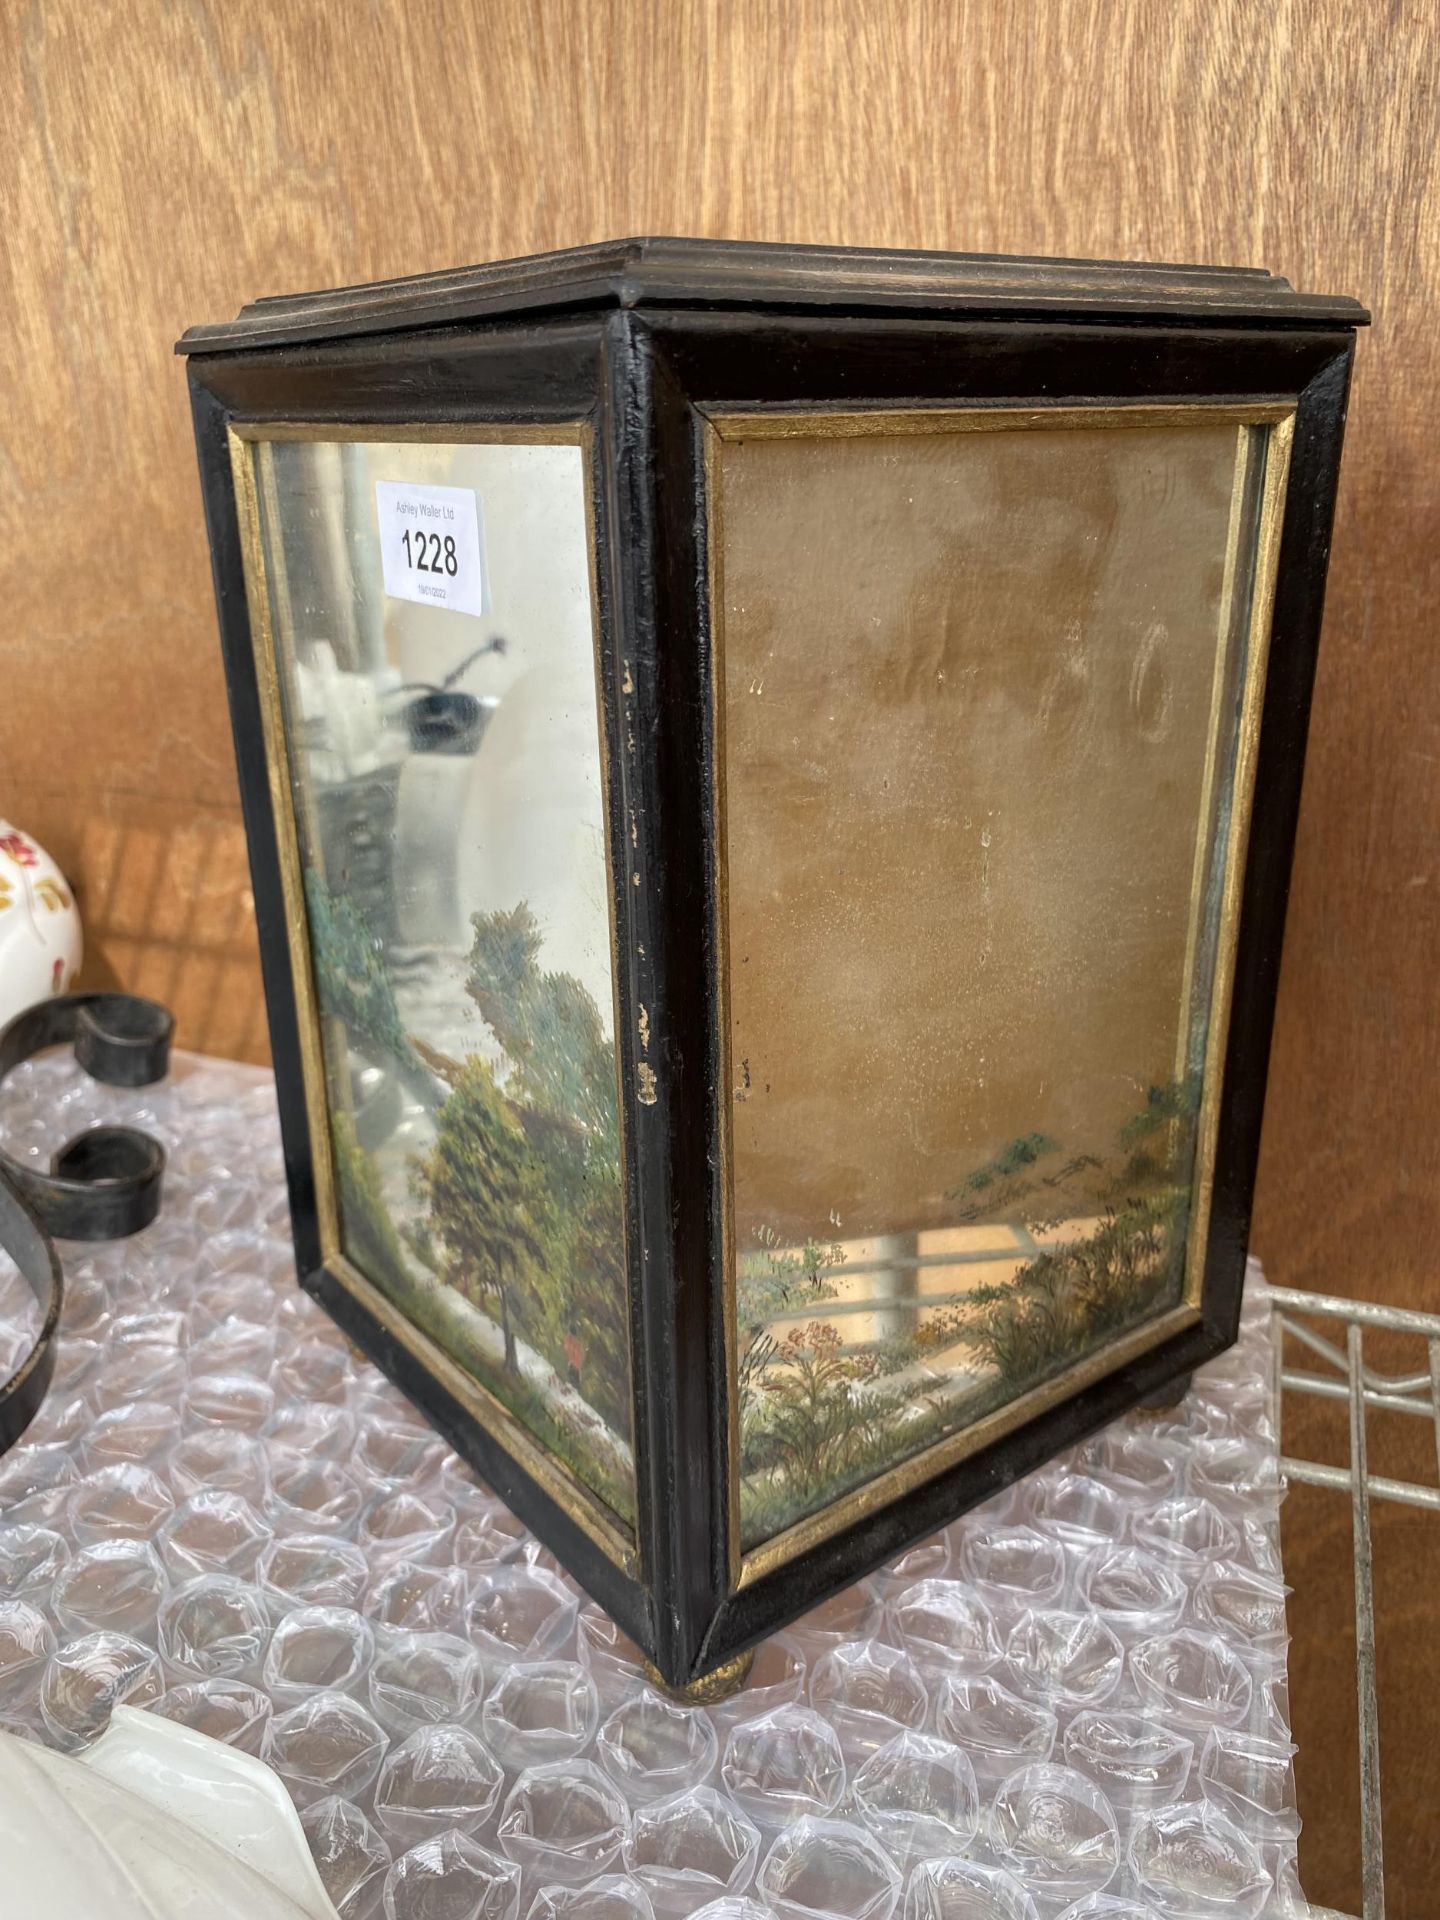 A VINTAGE MIRRORED WOODEN BOX - Image 3 of 4